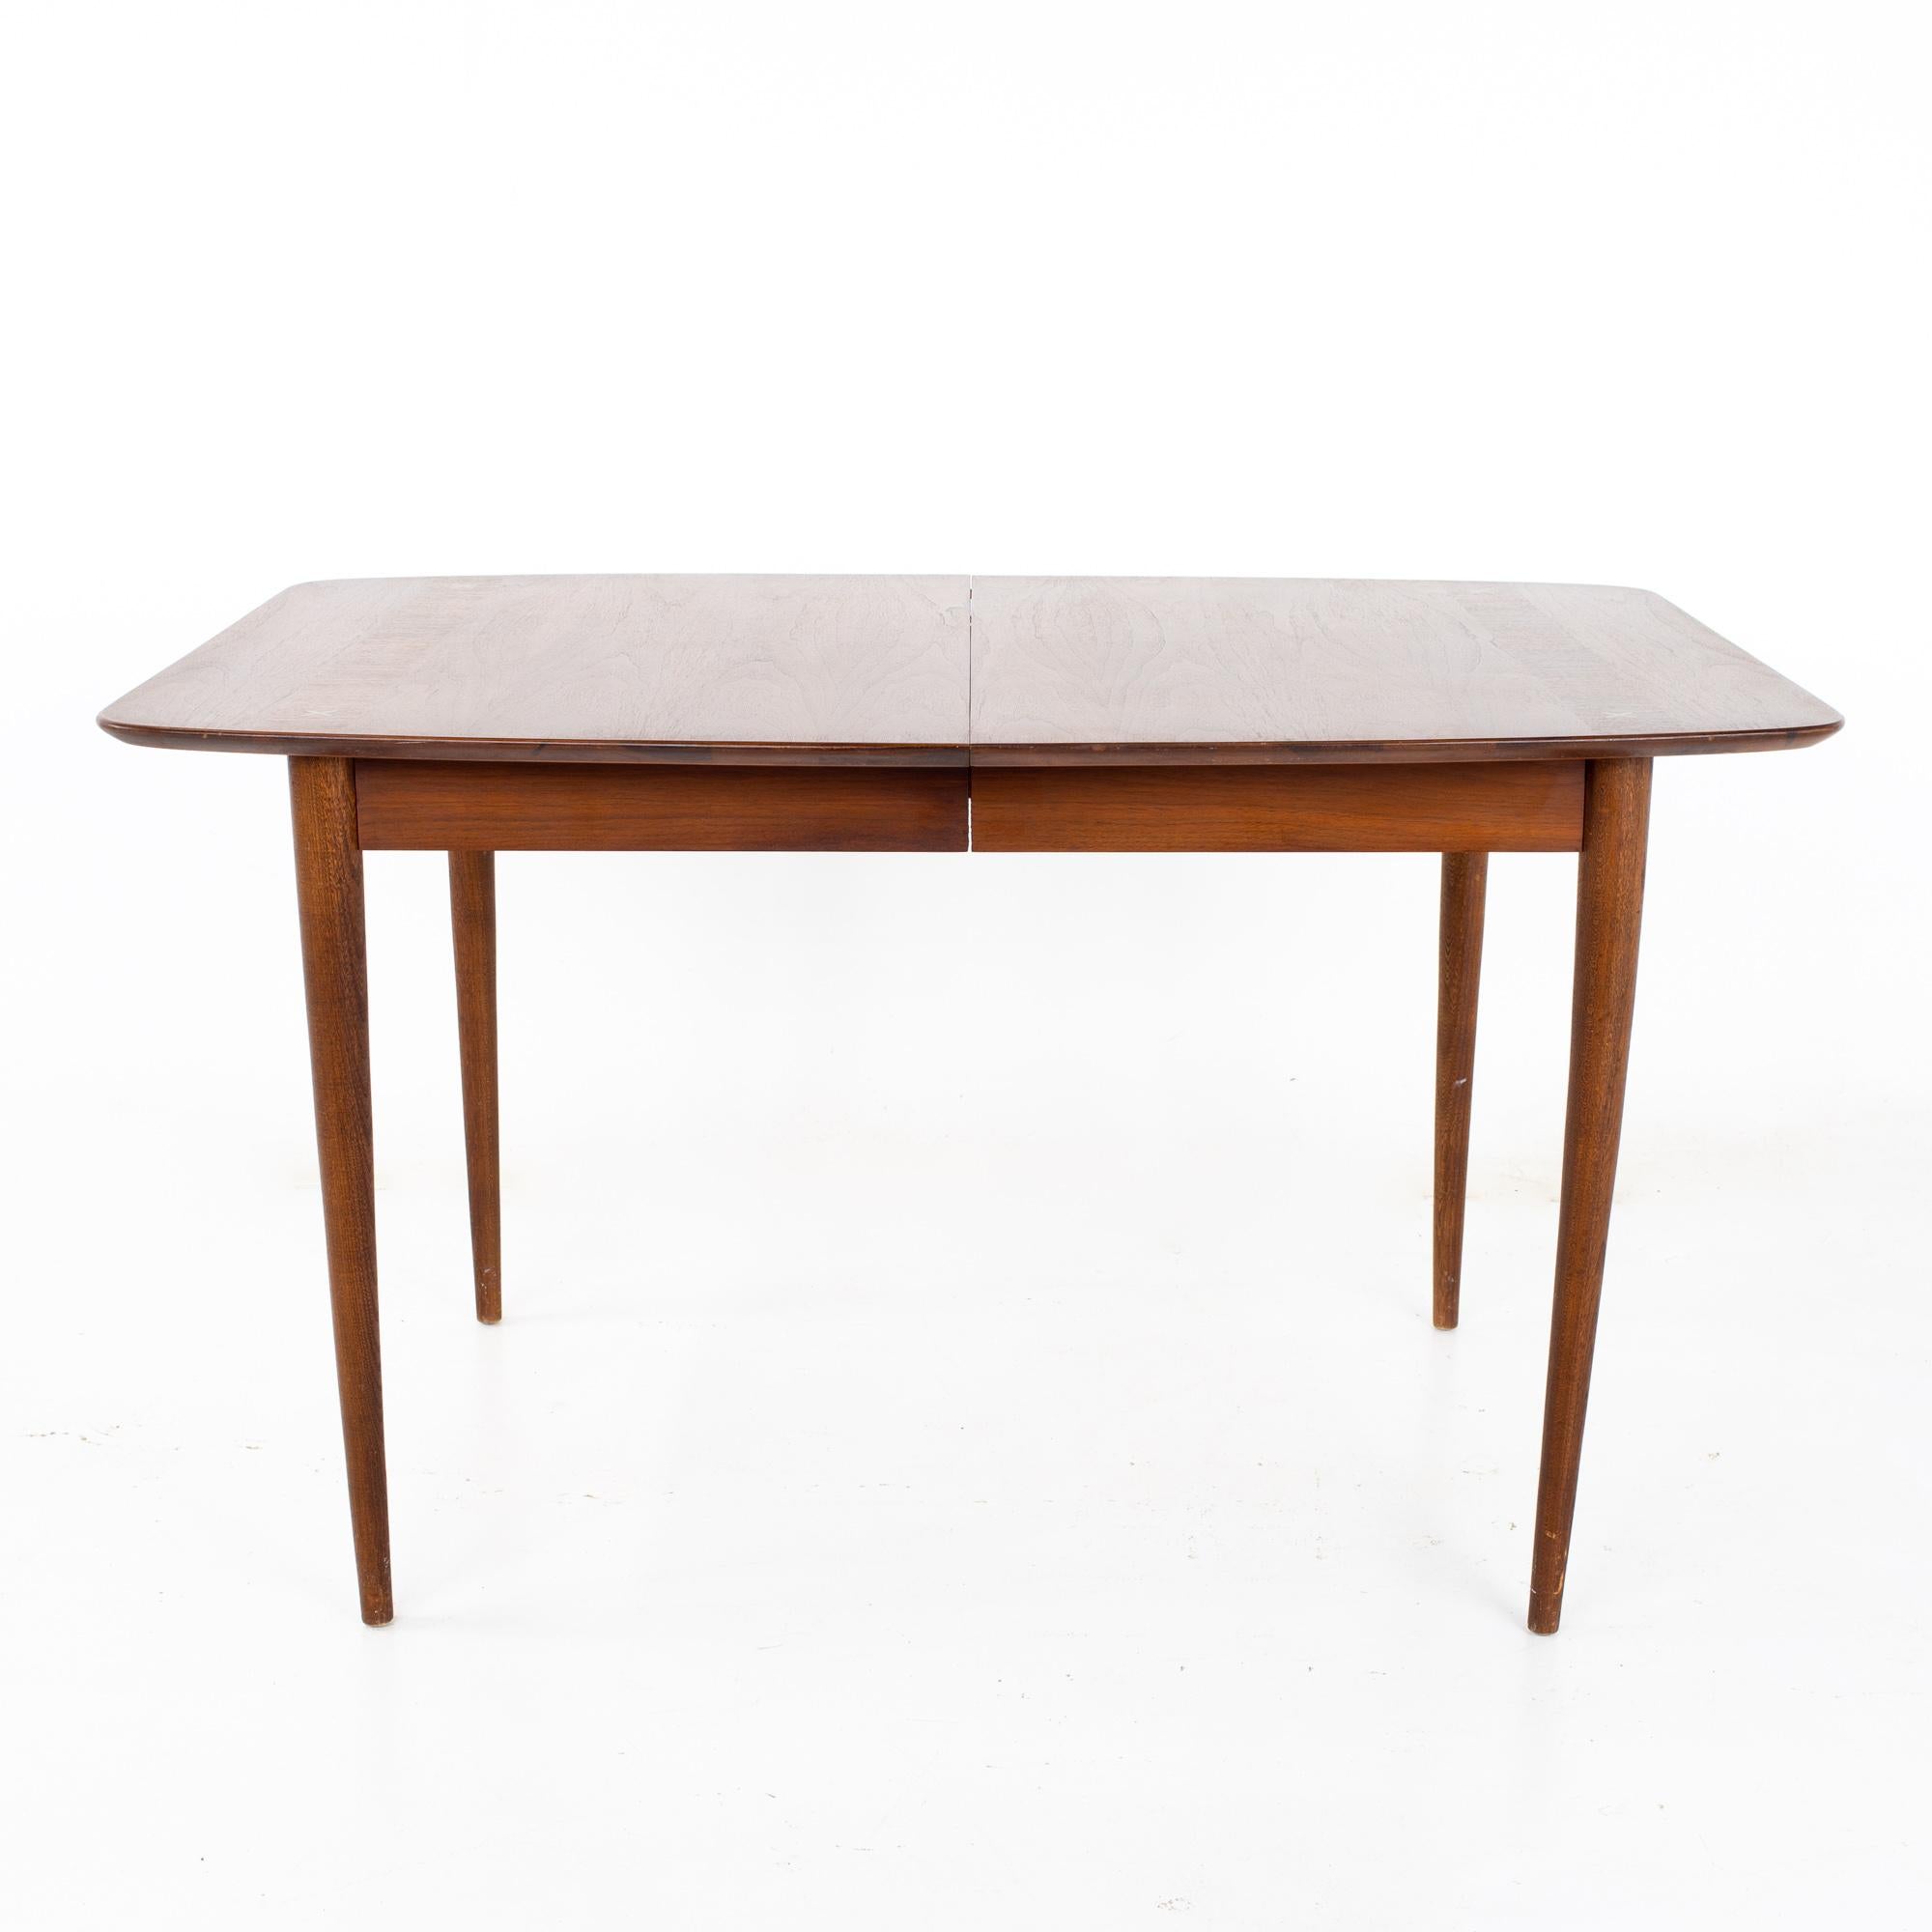 Merton Gershun for American of Martinsville Dania mid-century dining table.

Table measures: 60 wide x 39 deep x 30 inches high, with a chair clearance o 28 inches, each of the 2 leaves are 12 inches wide, making a maximum table width of 84 inches